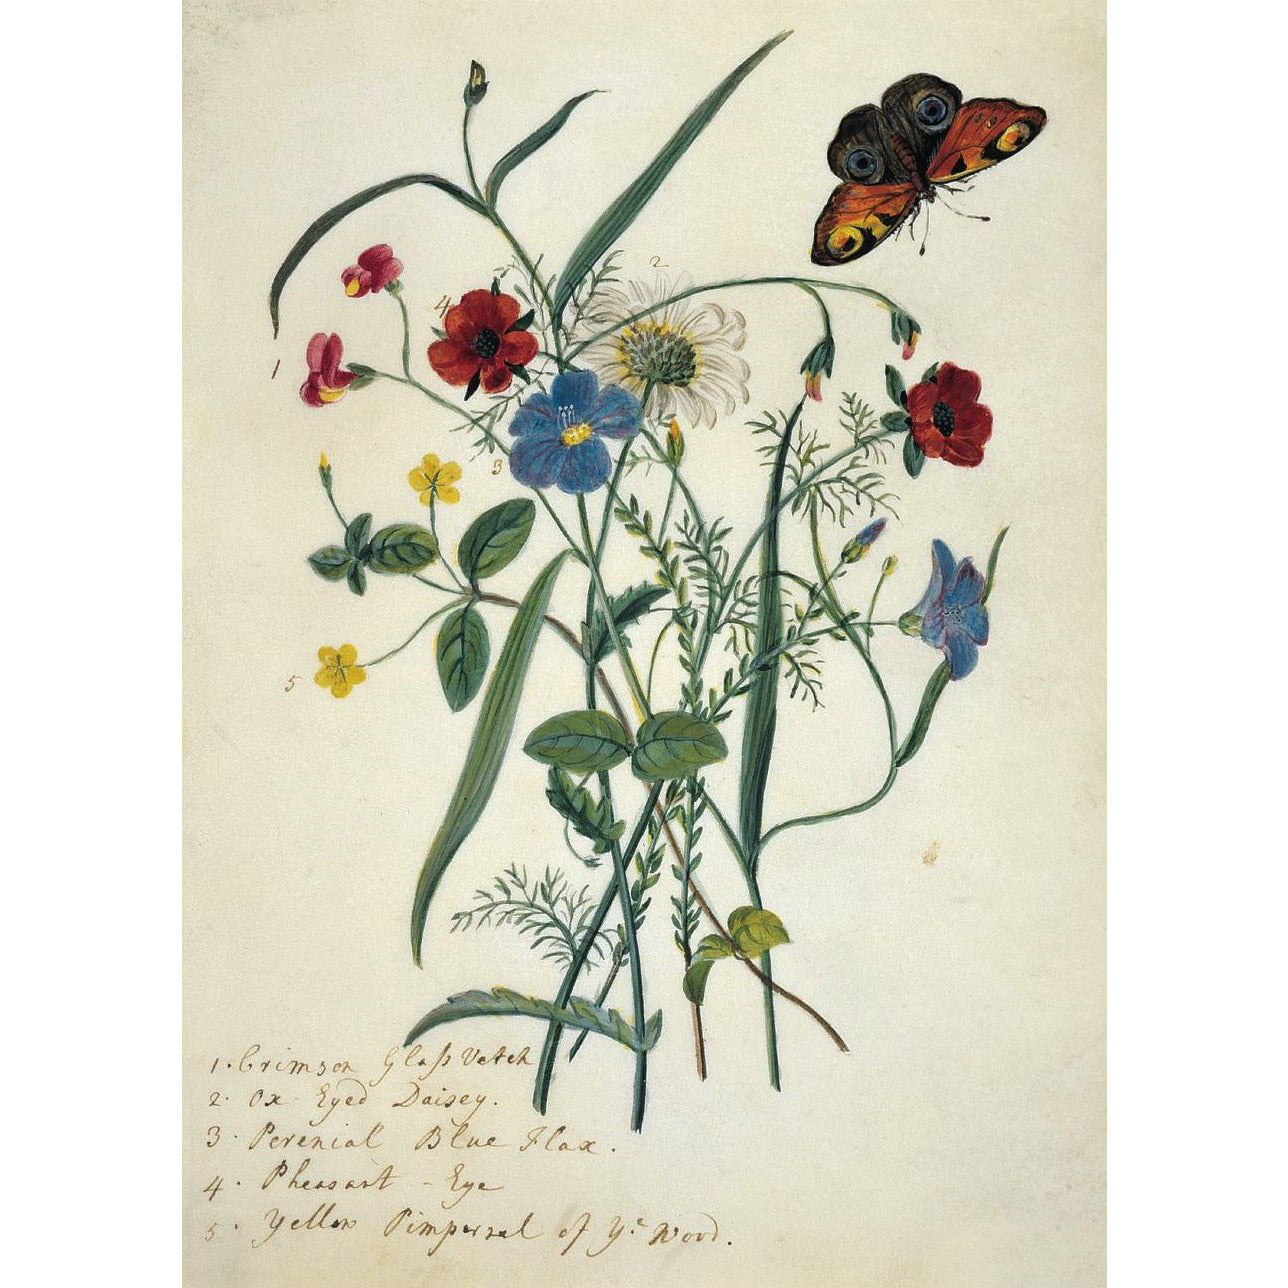 Greeting card - Flowers of the field by Mary Forbes, including red vetch, blue flax, and a white daisy, with a tortoiseshell butterfly. From the Broughton collection of The Fitzwilliam Museum, brought to you by CuratingCambridge.com